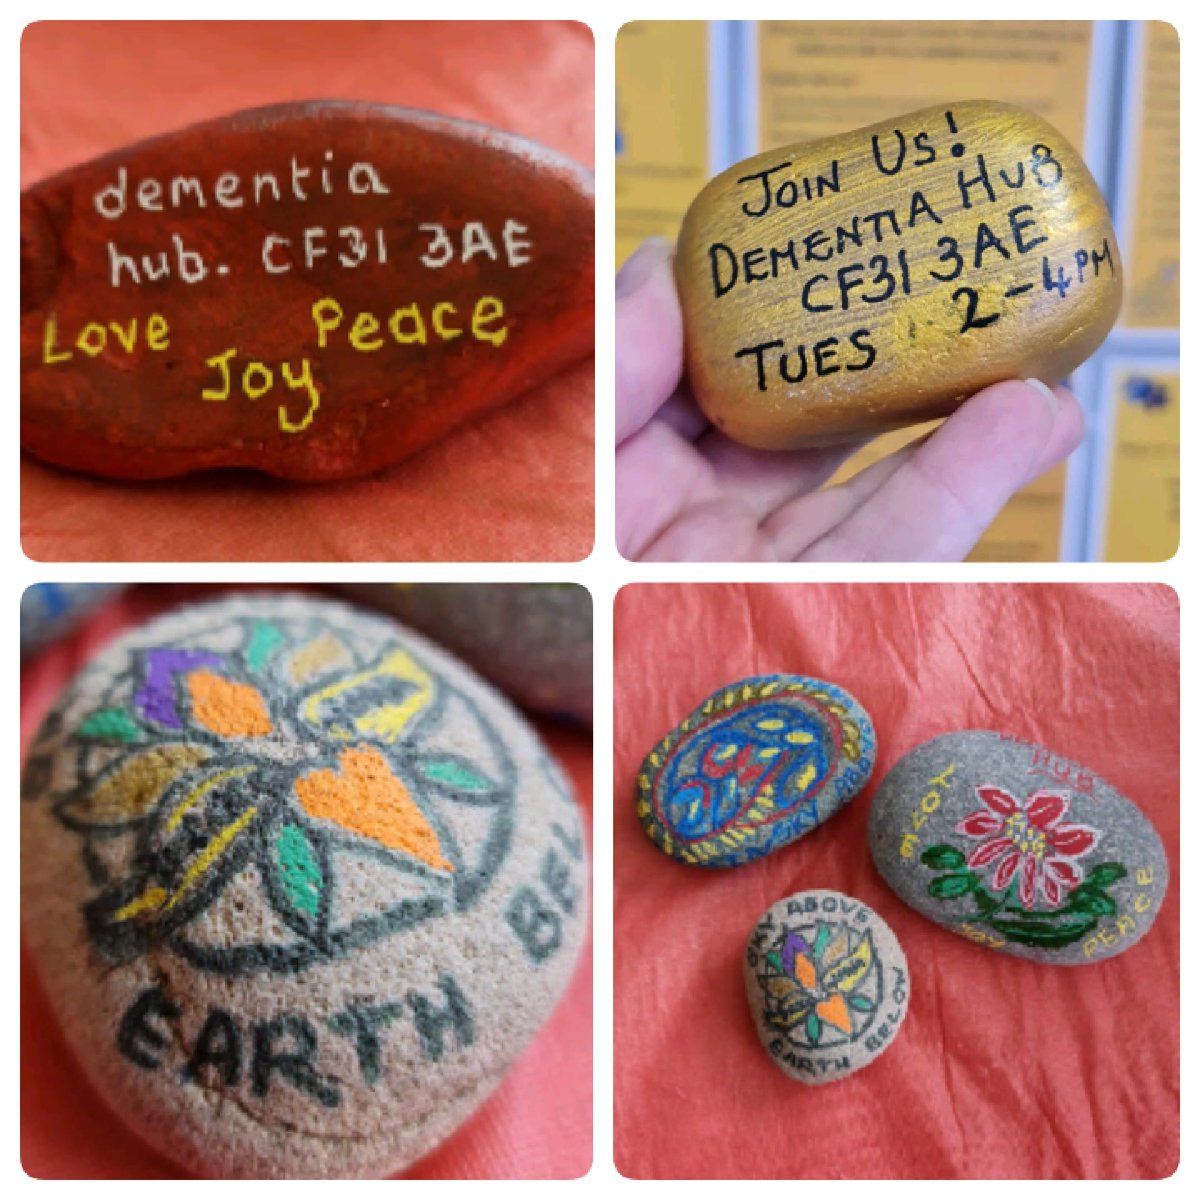 🪨🎸DEMENTIA HUB ROCKS🎸🪨 Our dementia hubs have been busy painting rocks to promote our fantastic wellbeing groups held around the Bridgend Borough.If you find one,please take a photo & send it to us to bdh@mhmwales.org.Then hide it again for someone else to find & enjoy!